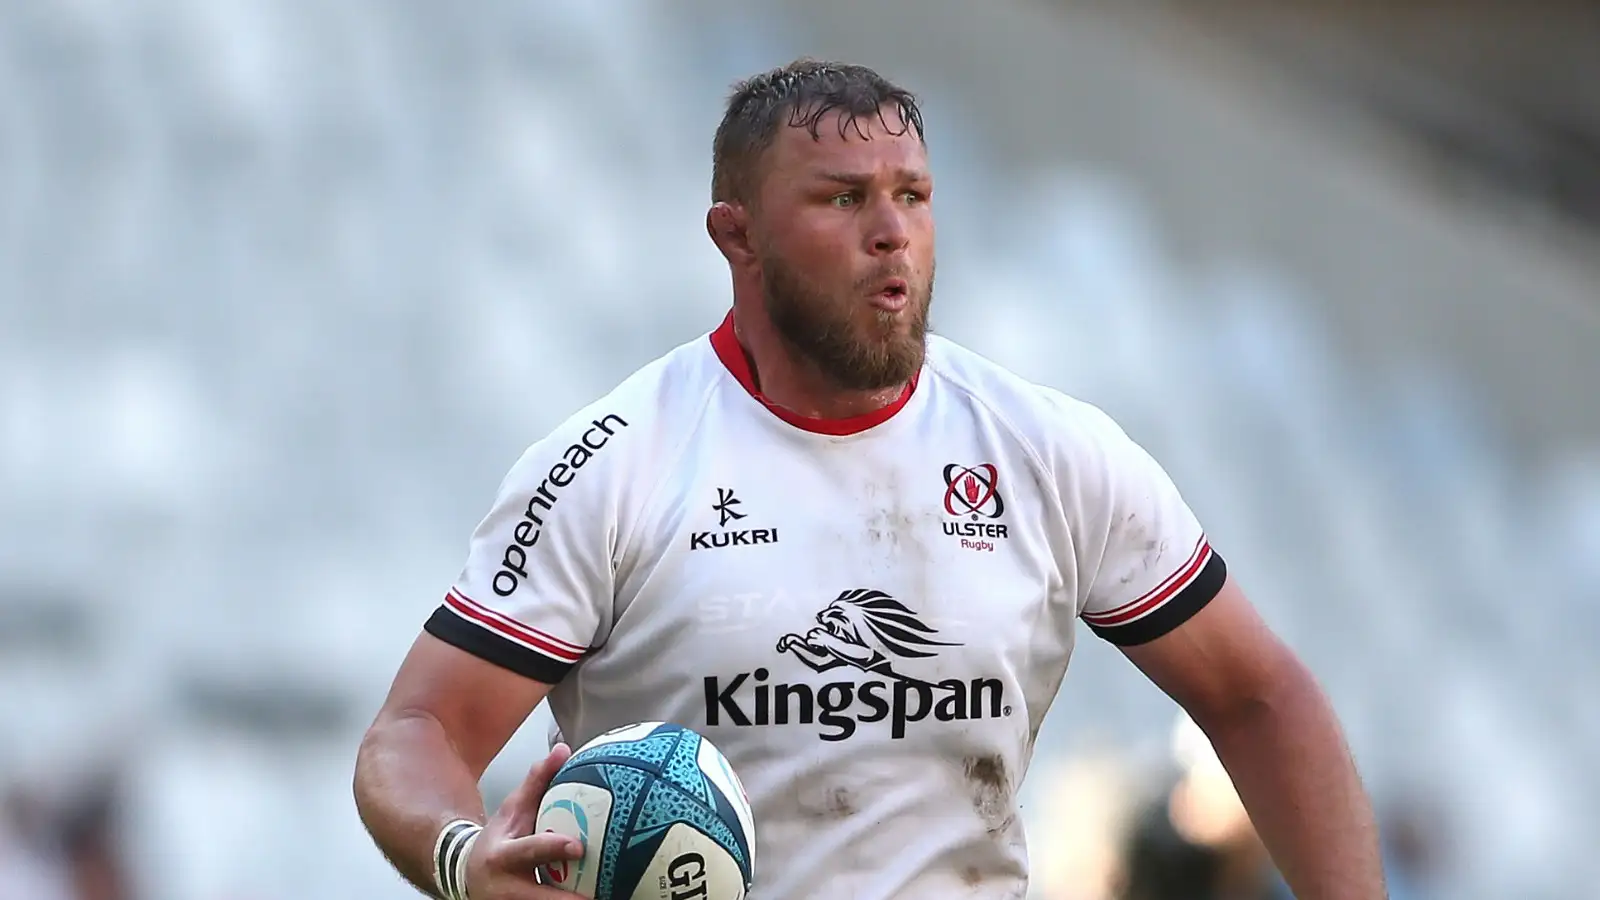 Ulster look to be getting their season back on track after a comprehensive 35-5 United Rugby Championship (URC) victory over the Stormers, while the Bulls suffered a 37-28 defeat at the hands of Scarlets. united rugby championship